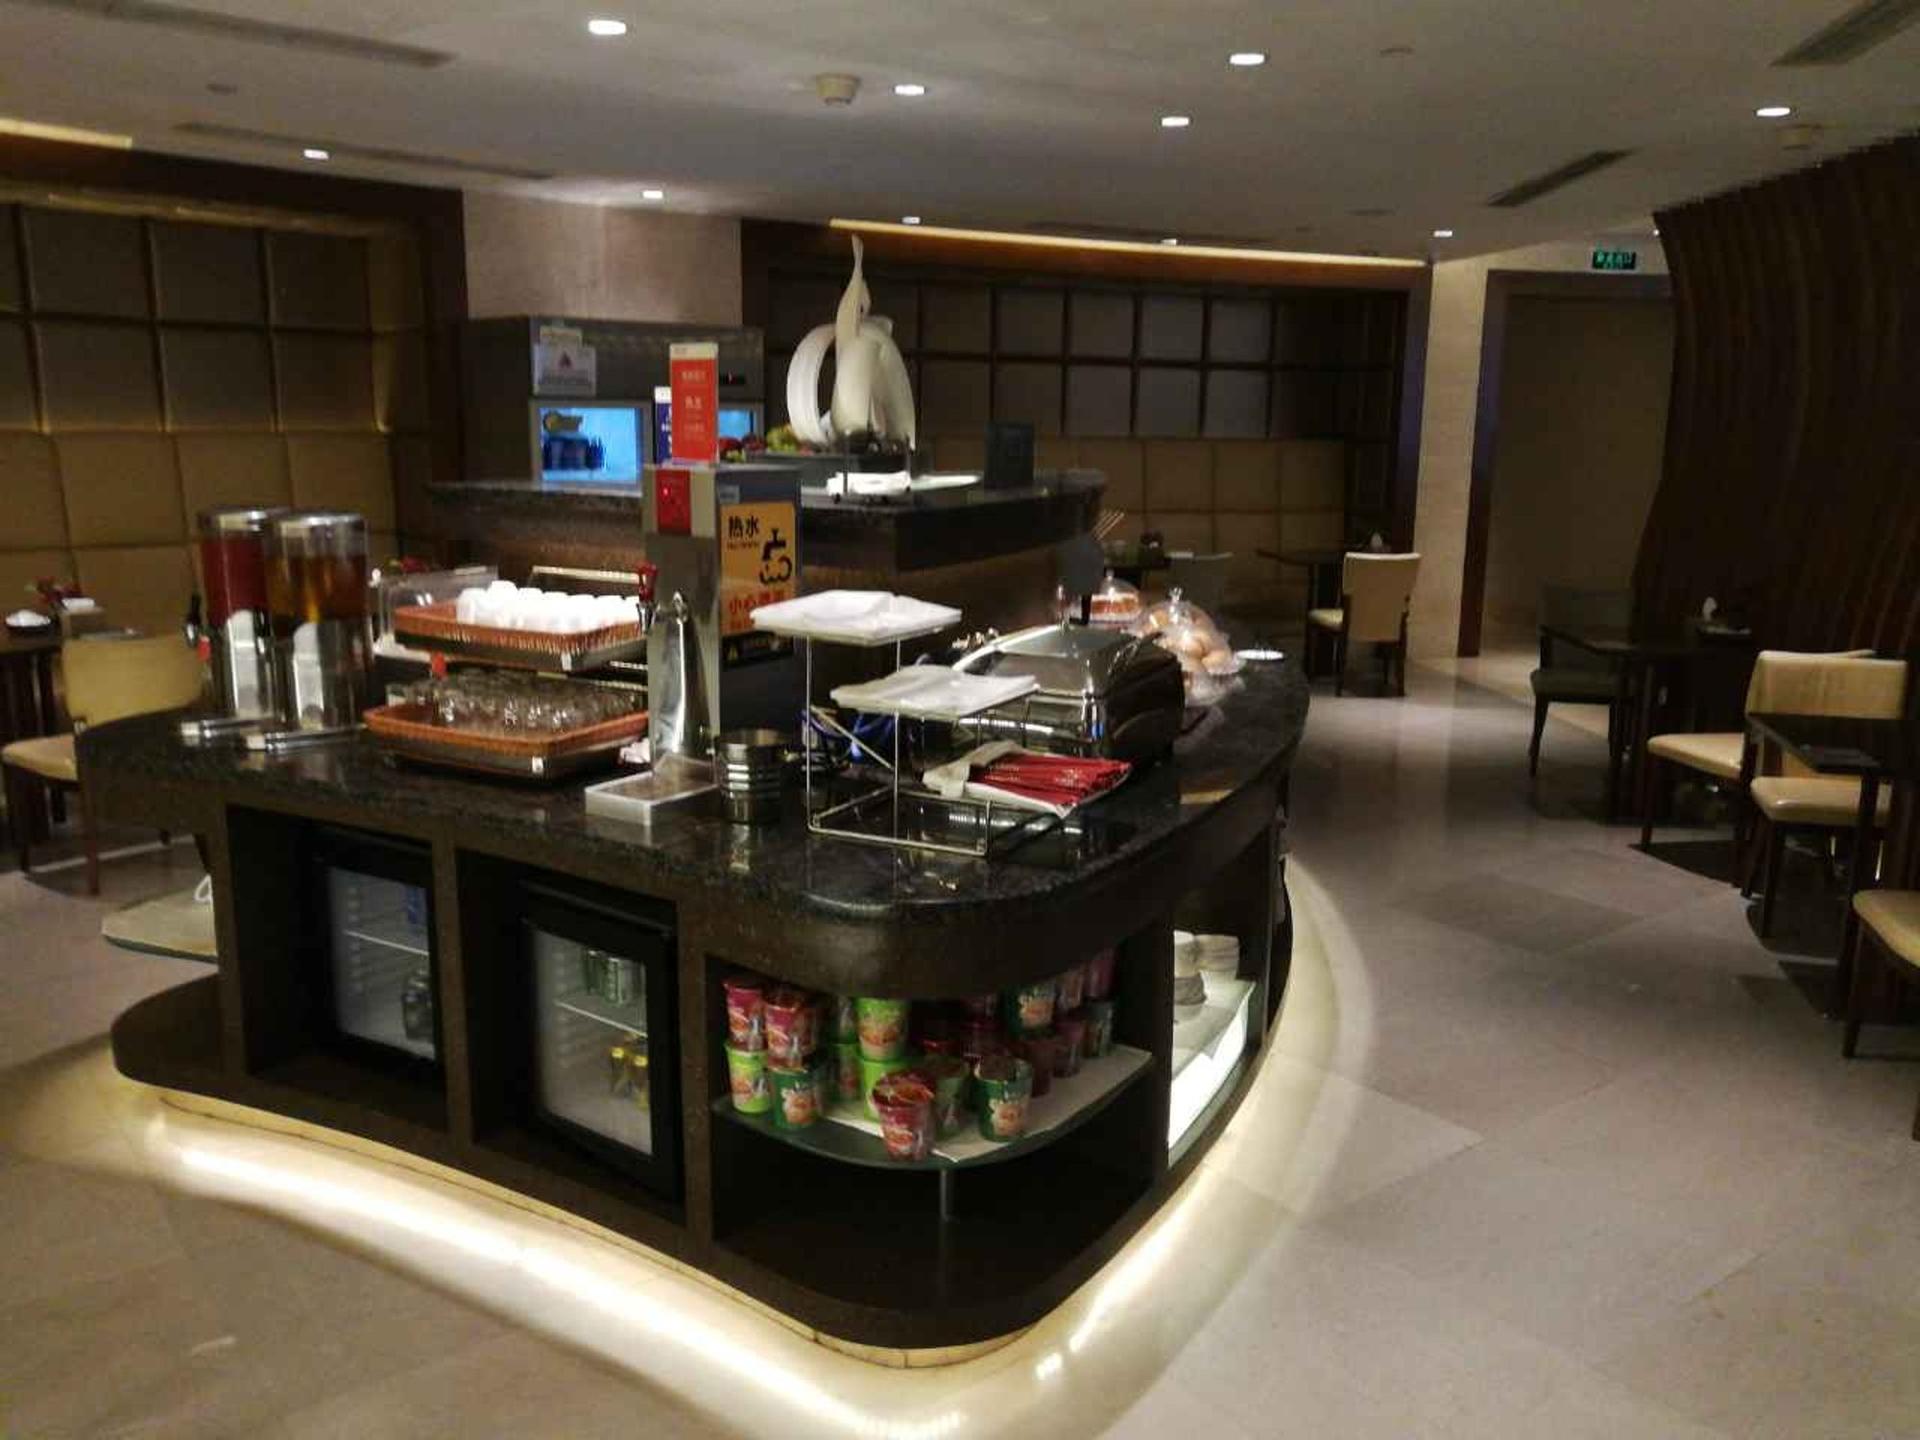 Air China Domestic First & Business Class Lounge image 4 of 5